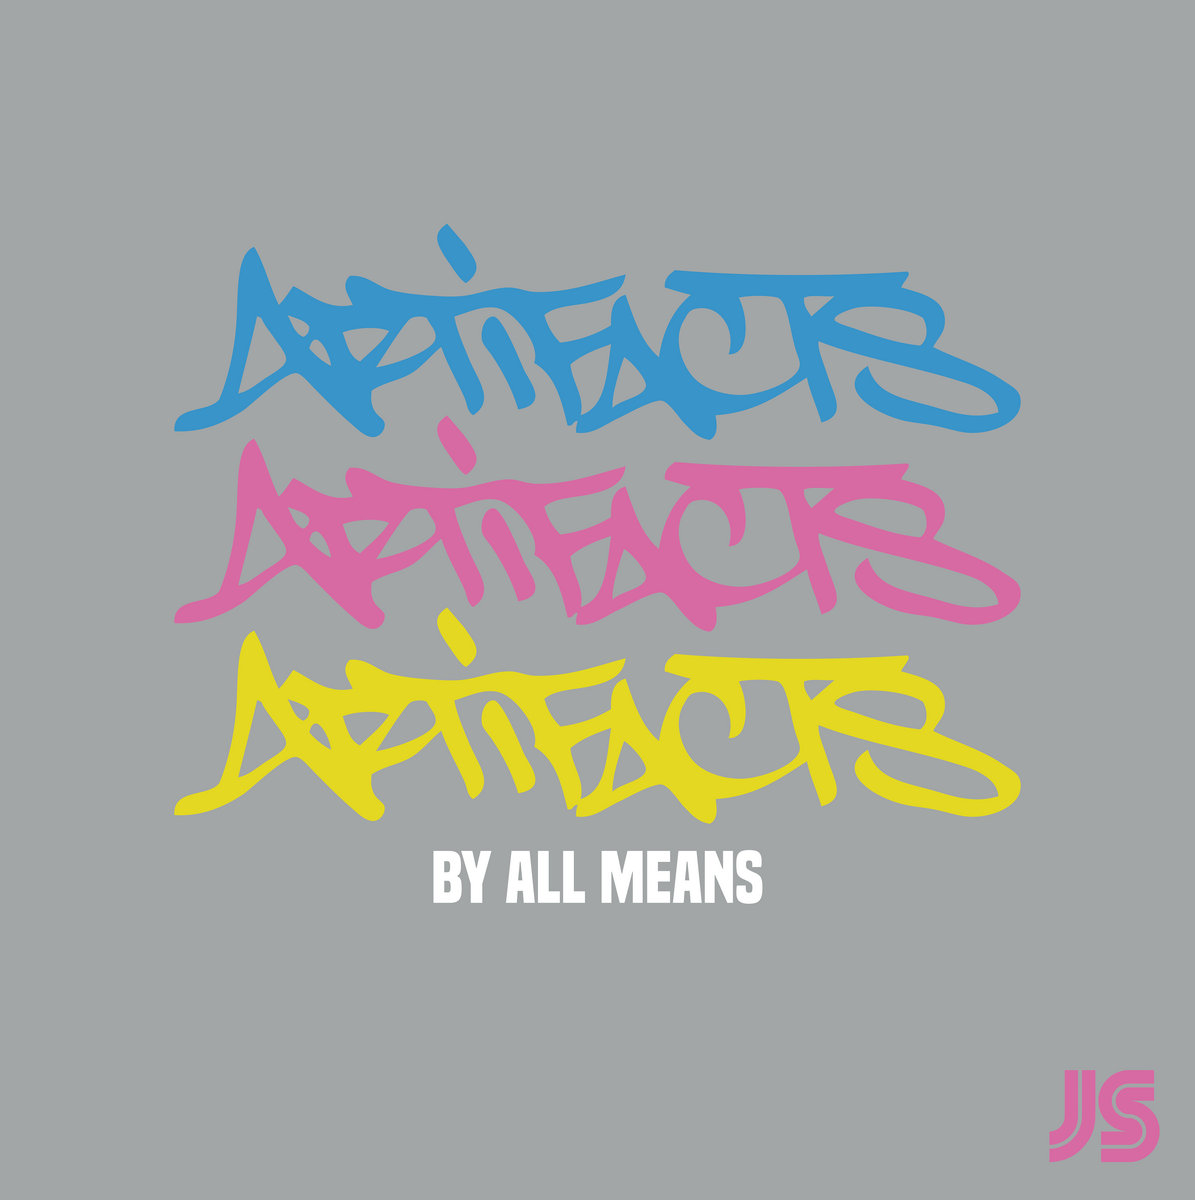 Jazz_spastik_feat_artifacts_by_all_means